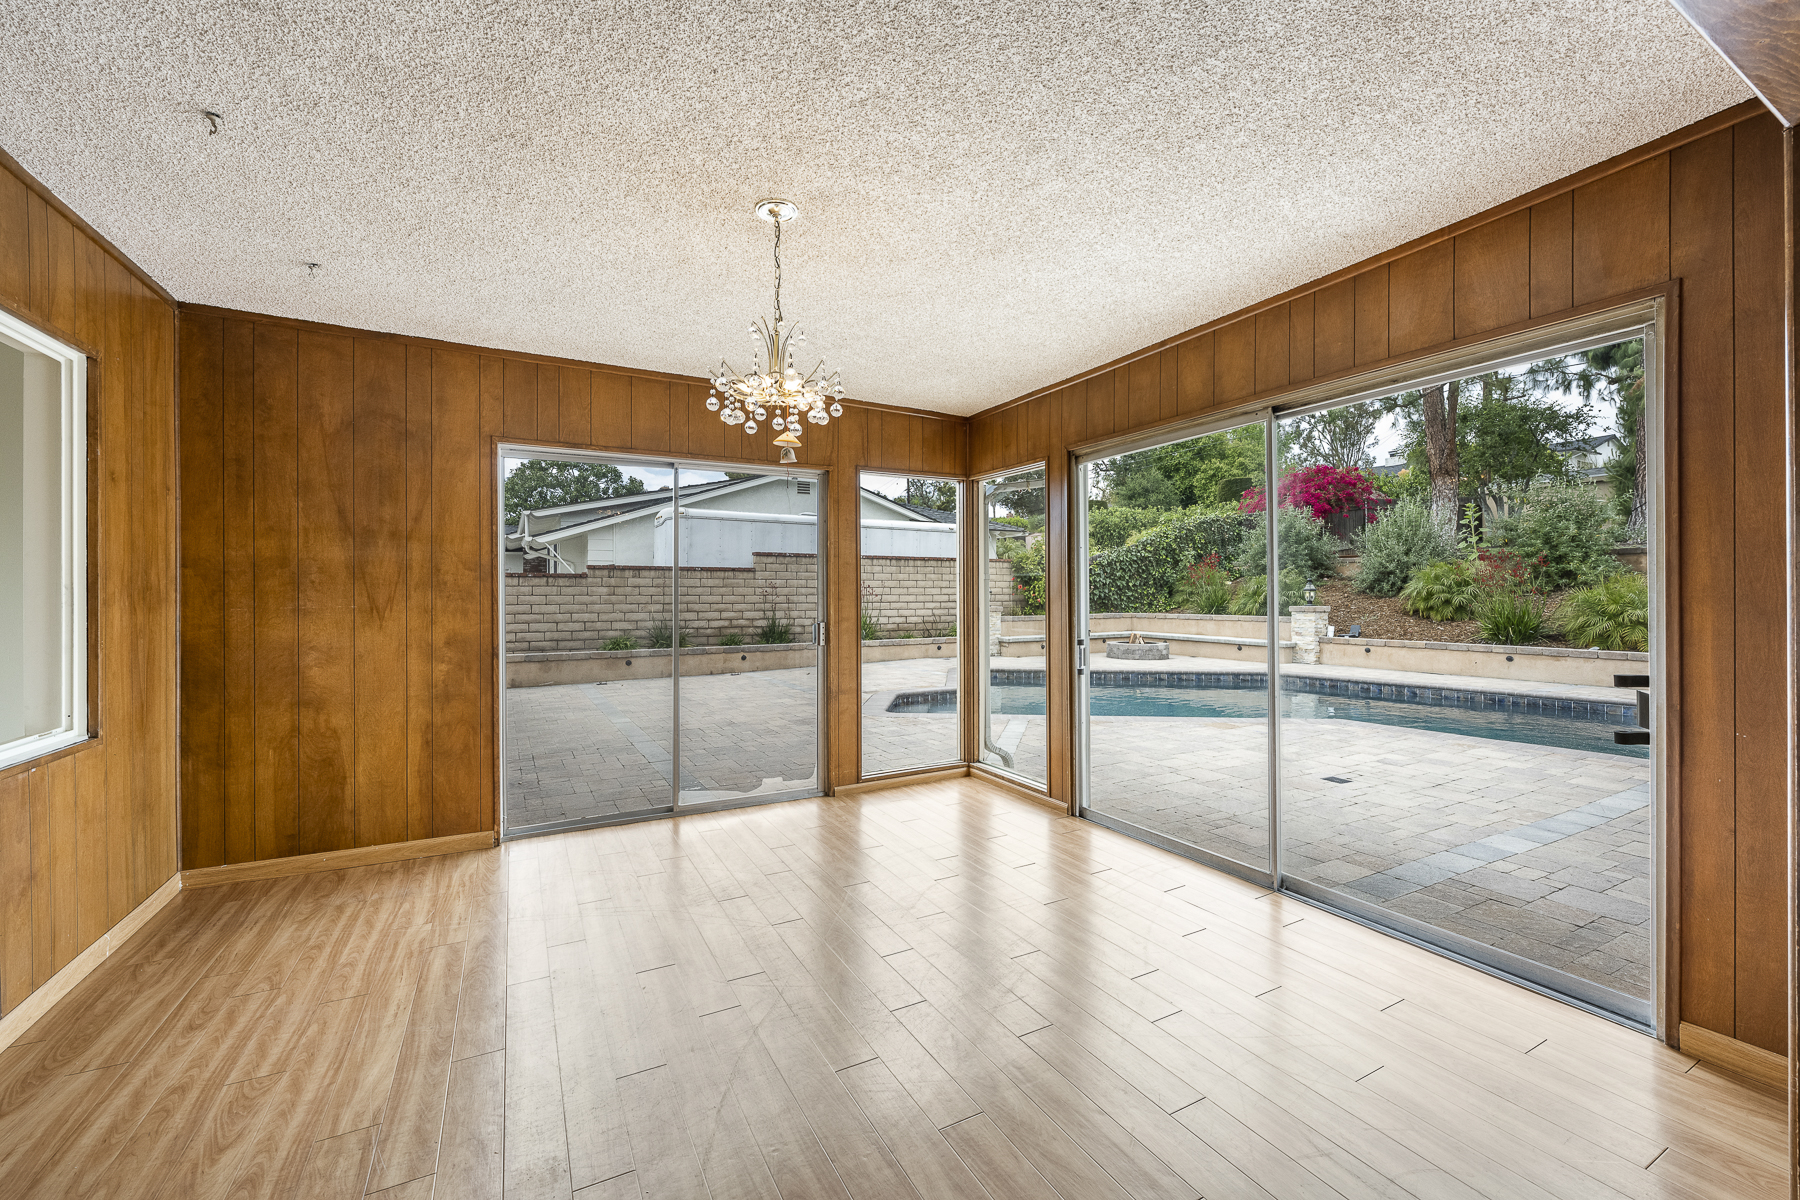 501 Dorothy Drive: forward facing view of dining room with two double sliding doors